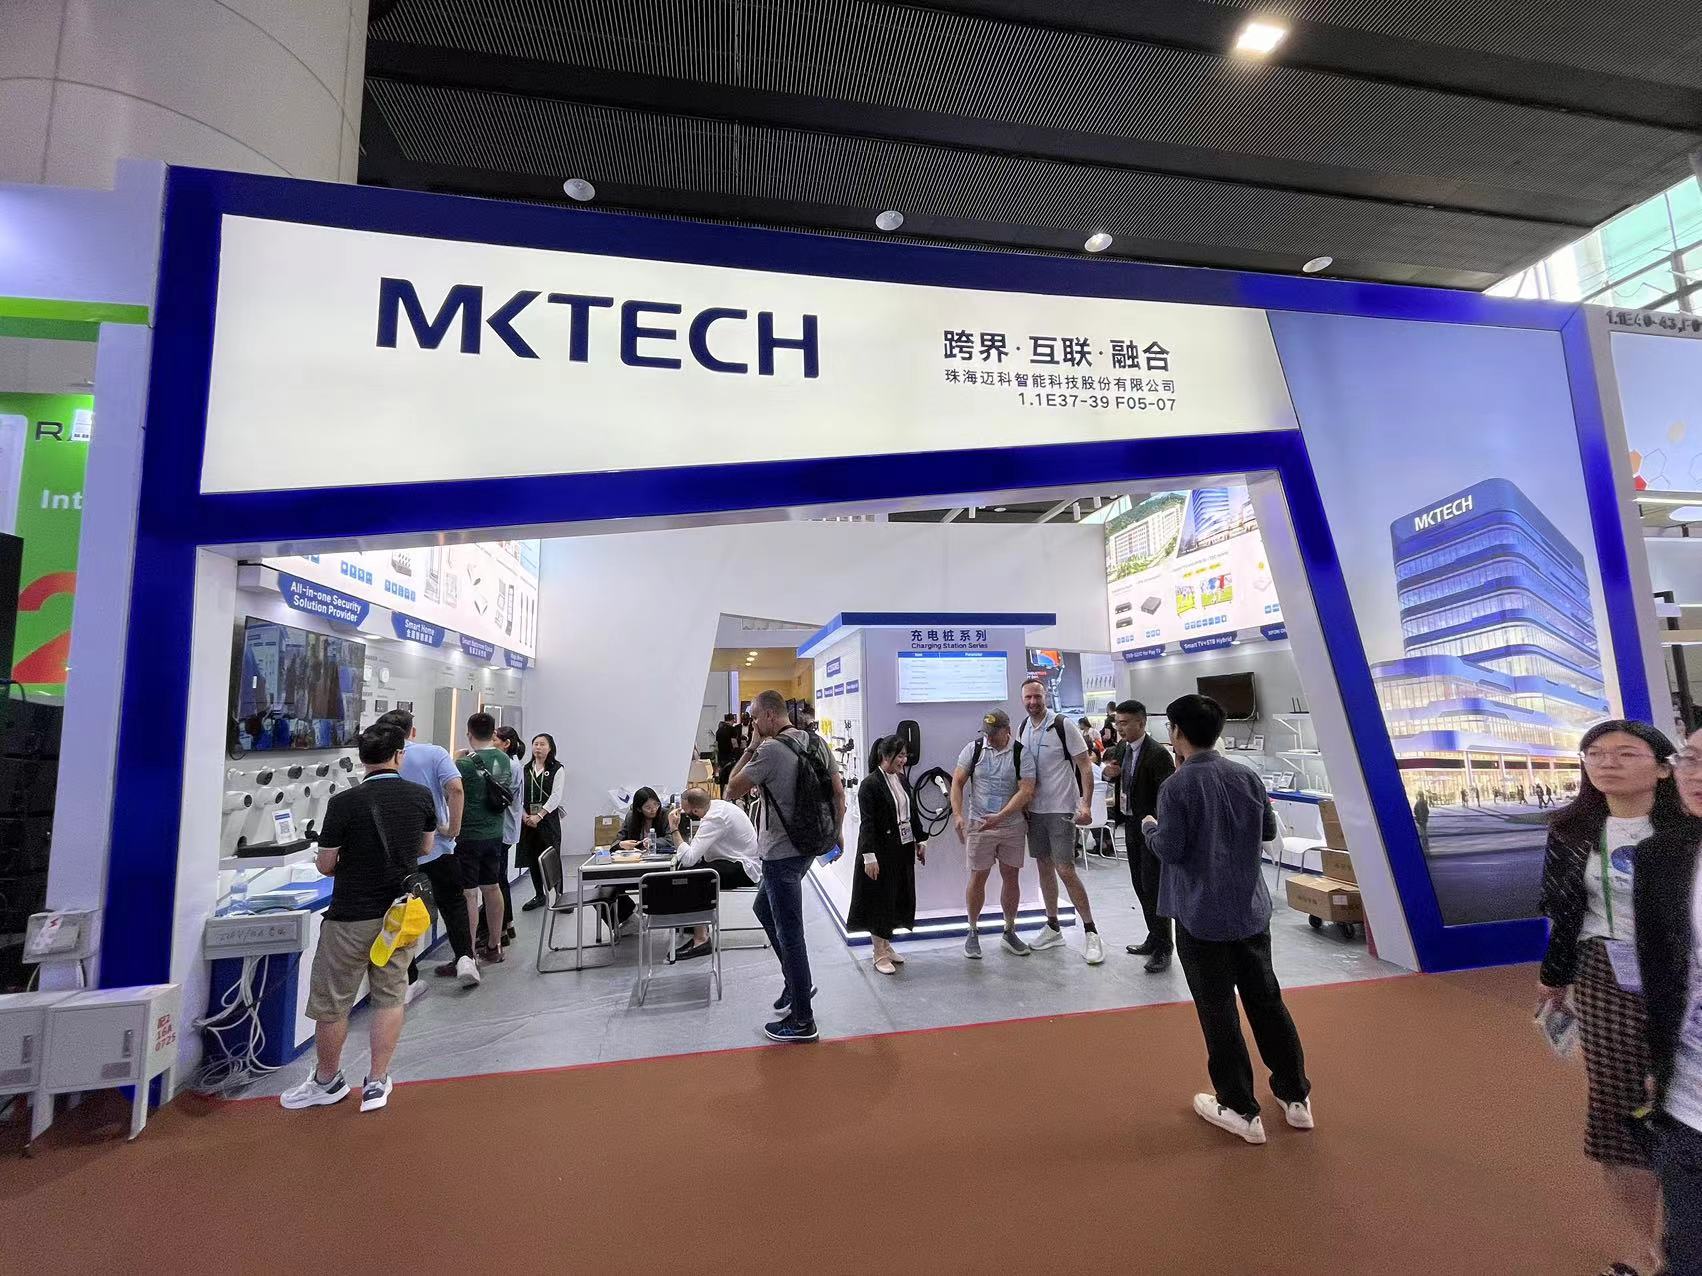 【135rd Canton Fair 】Gotech Smart Home Products are a Sight to Behold